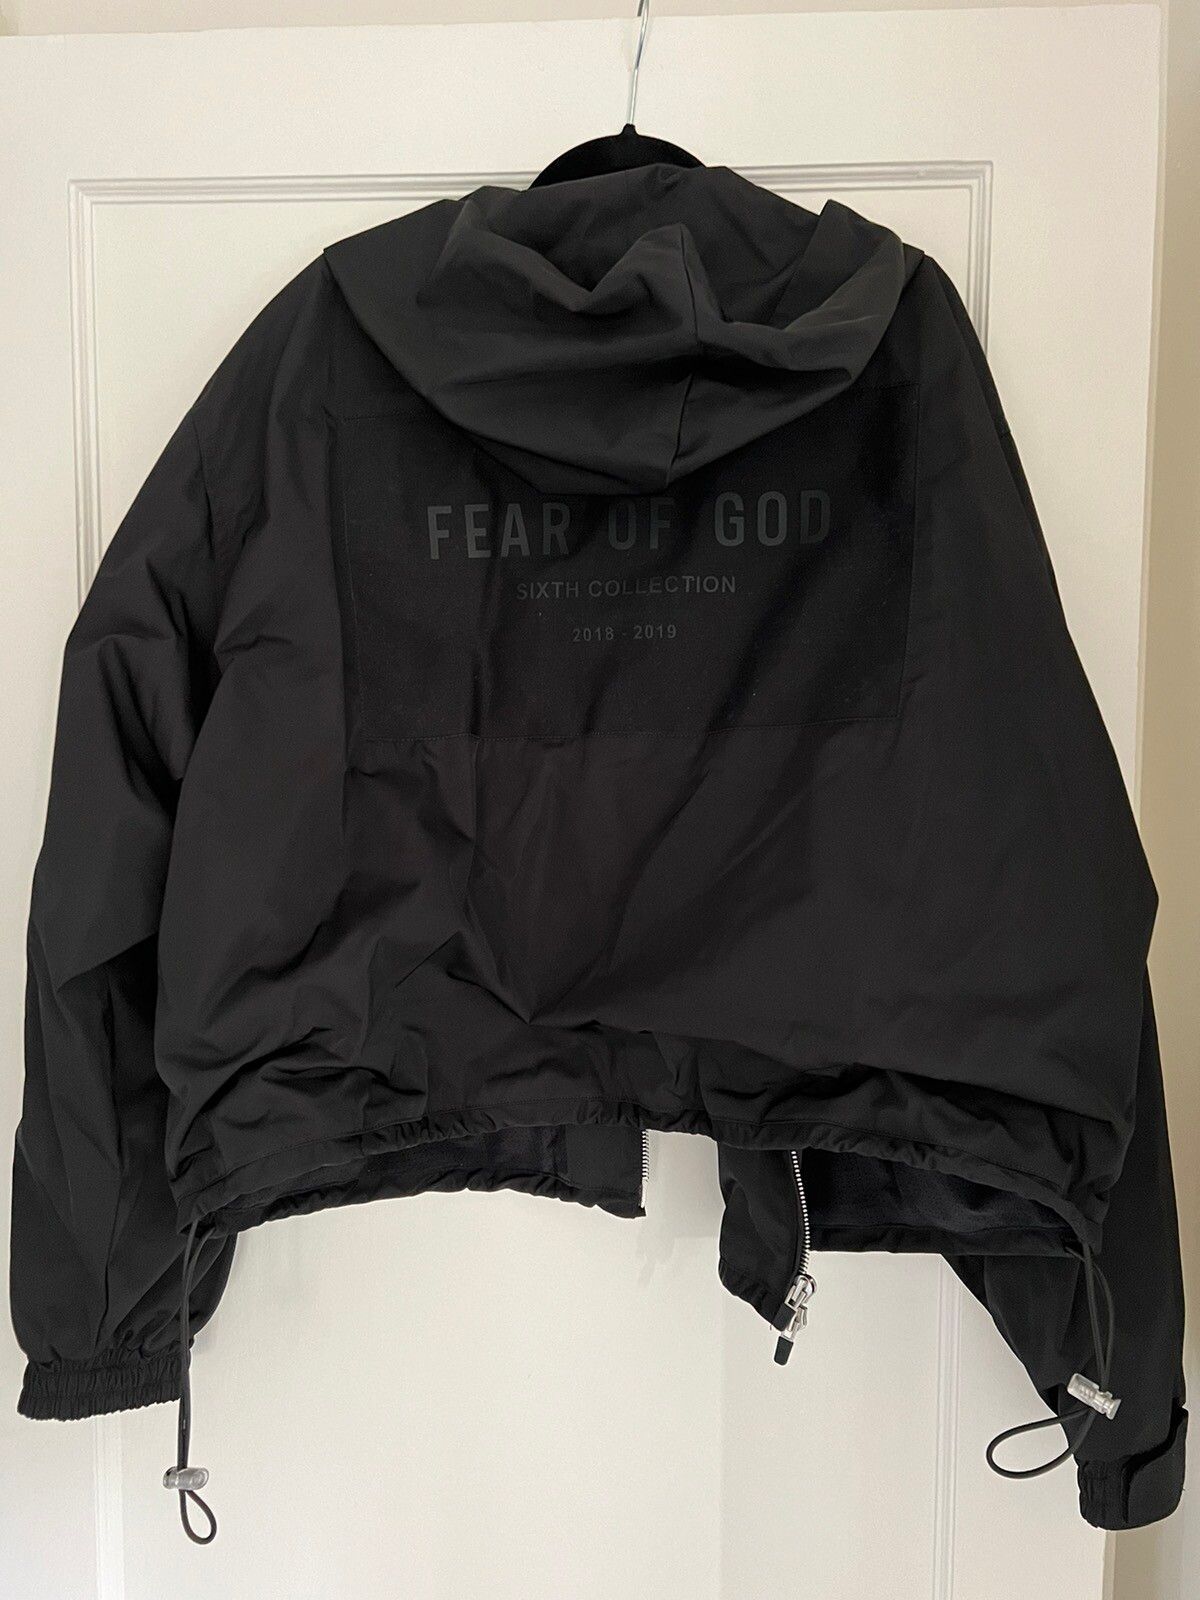 Fear of God Fear of God Hooded Jacket Sixth Collection | Grailed